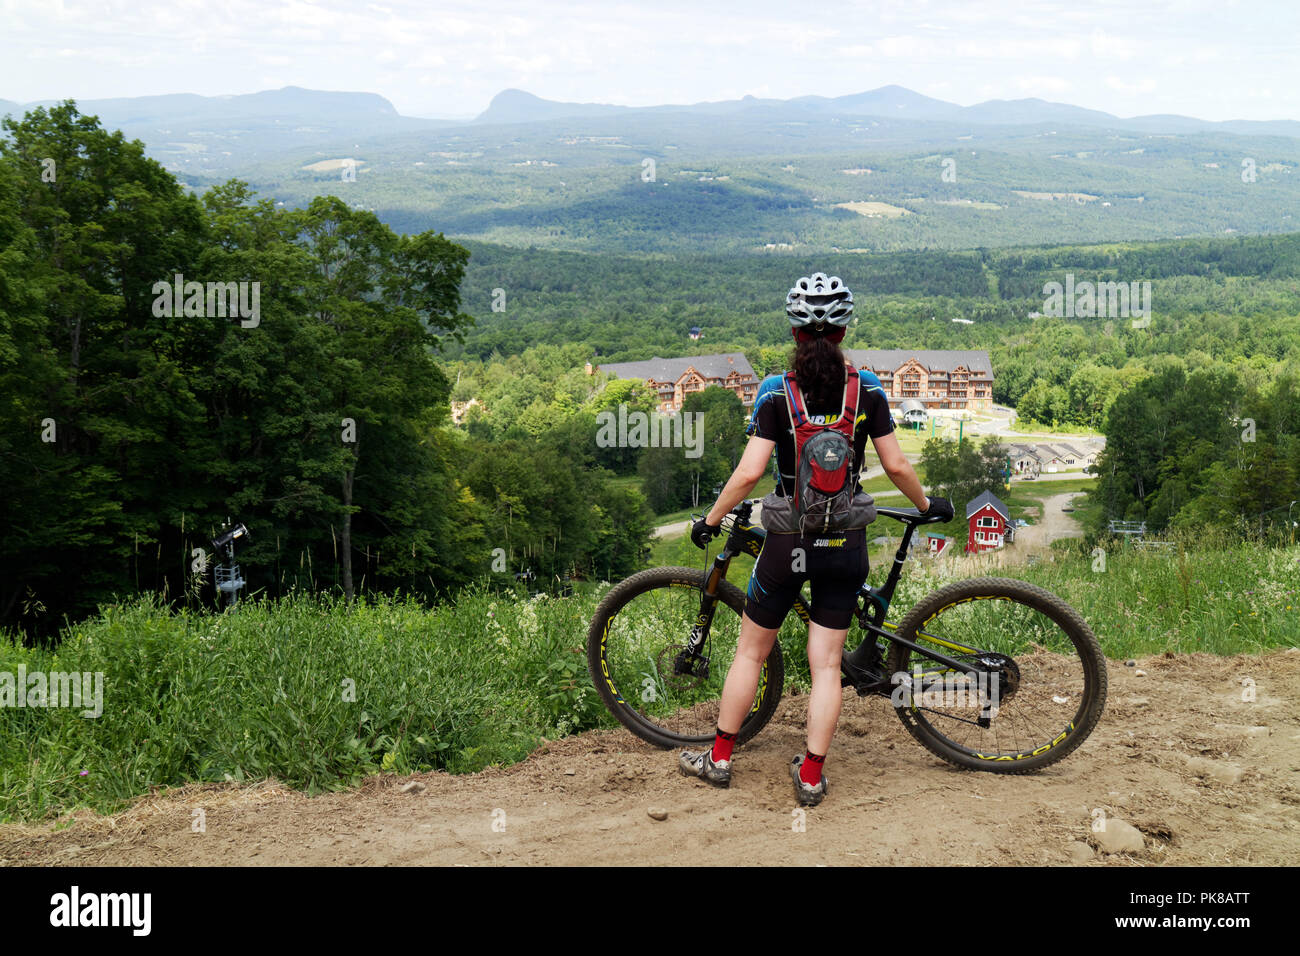 A lady mountain biker (in her 40s) pauses to admire the view on the Kingdom Trails mountain bike park in East Burke, Vermont, USA Stock Photo